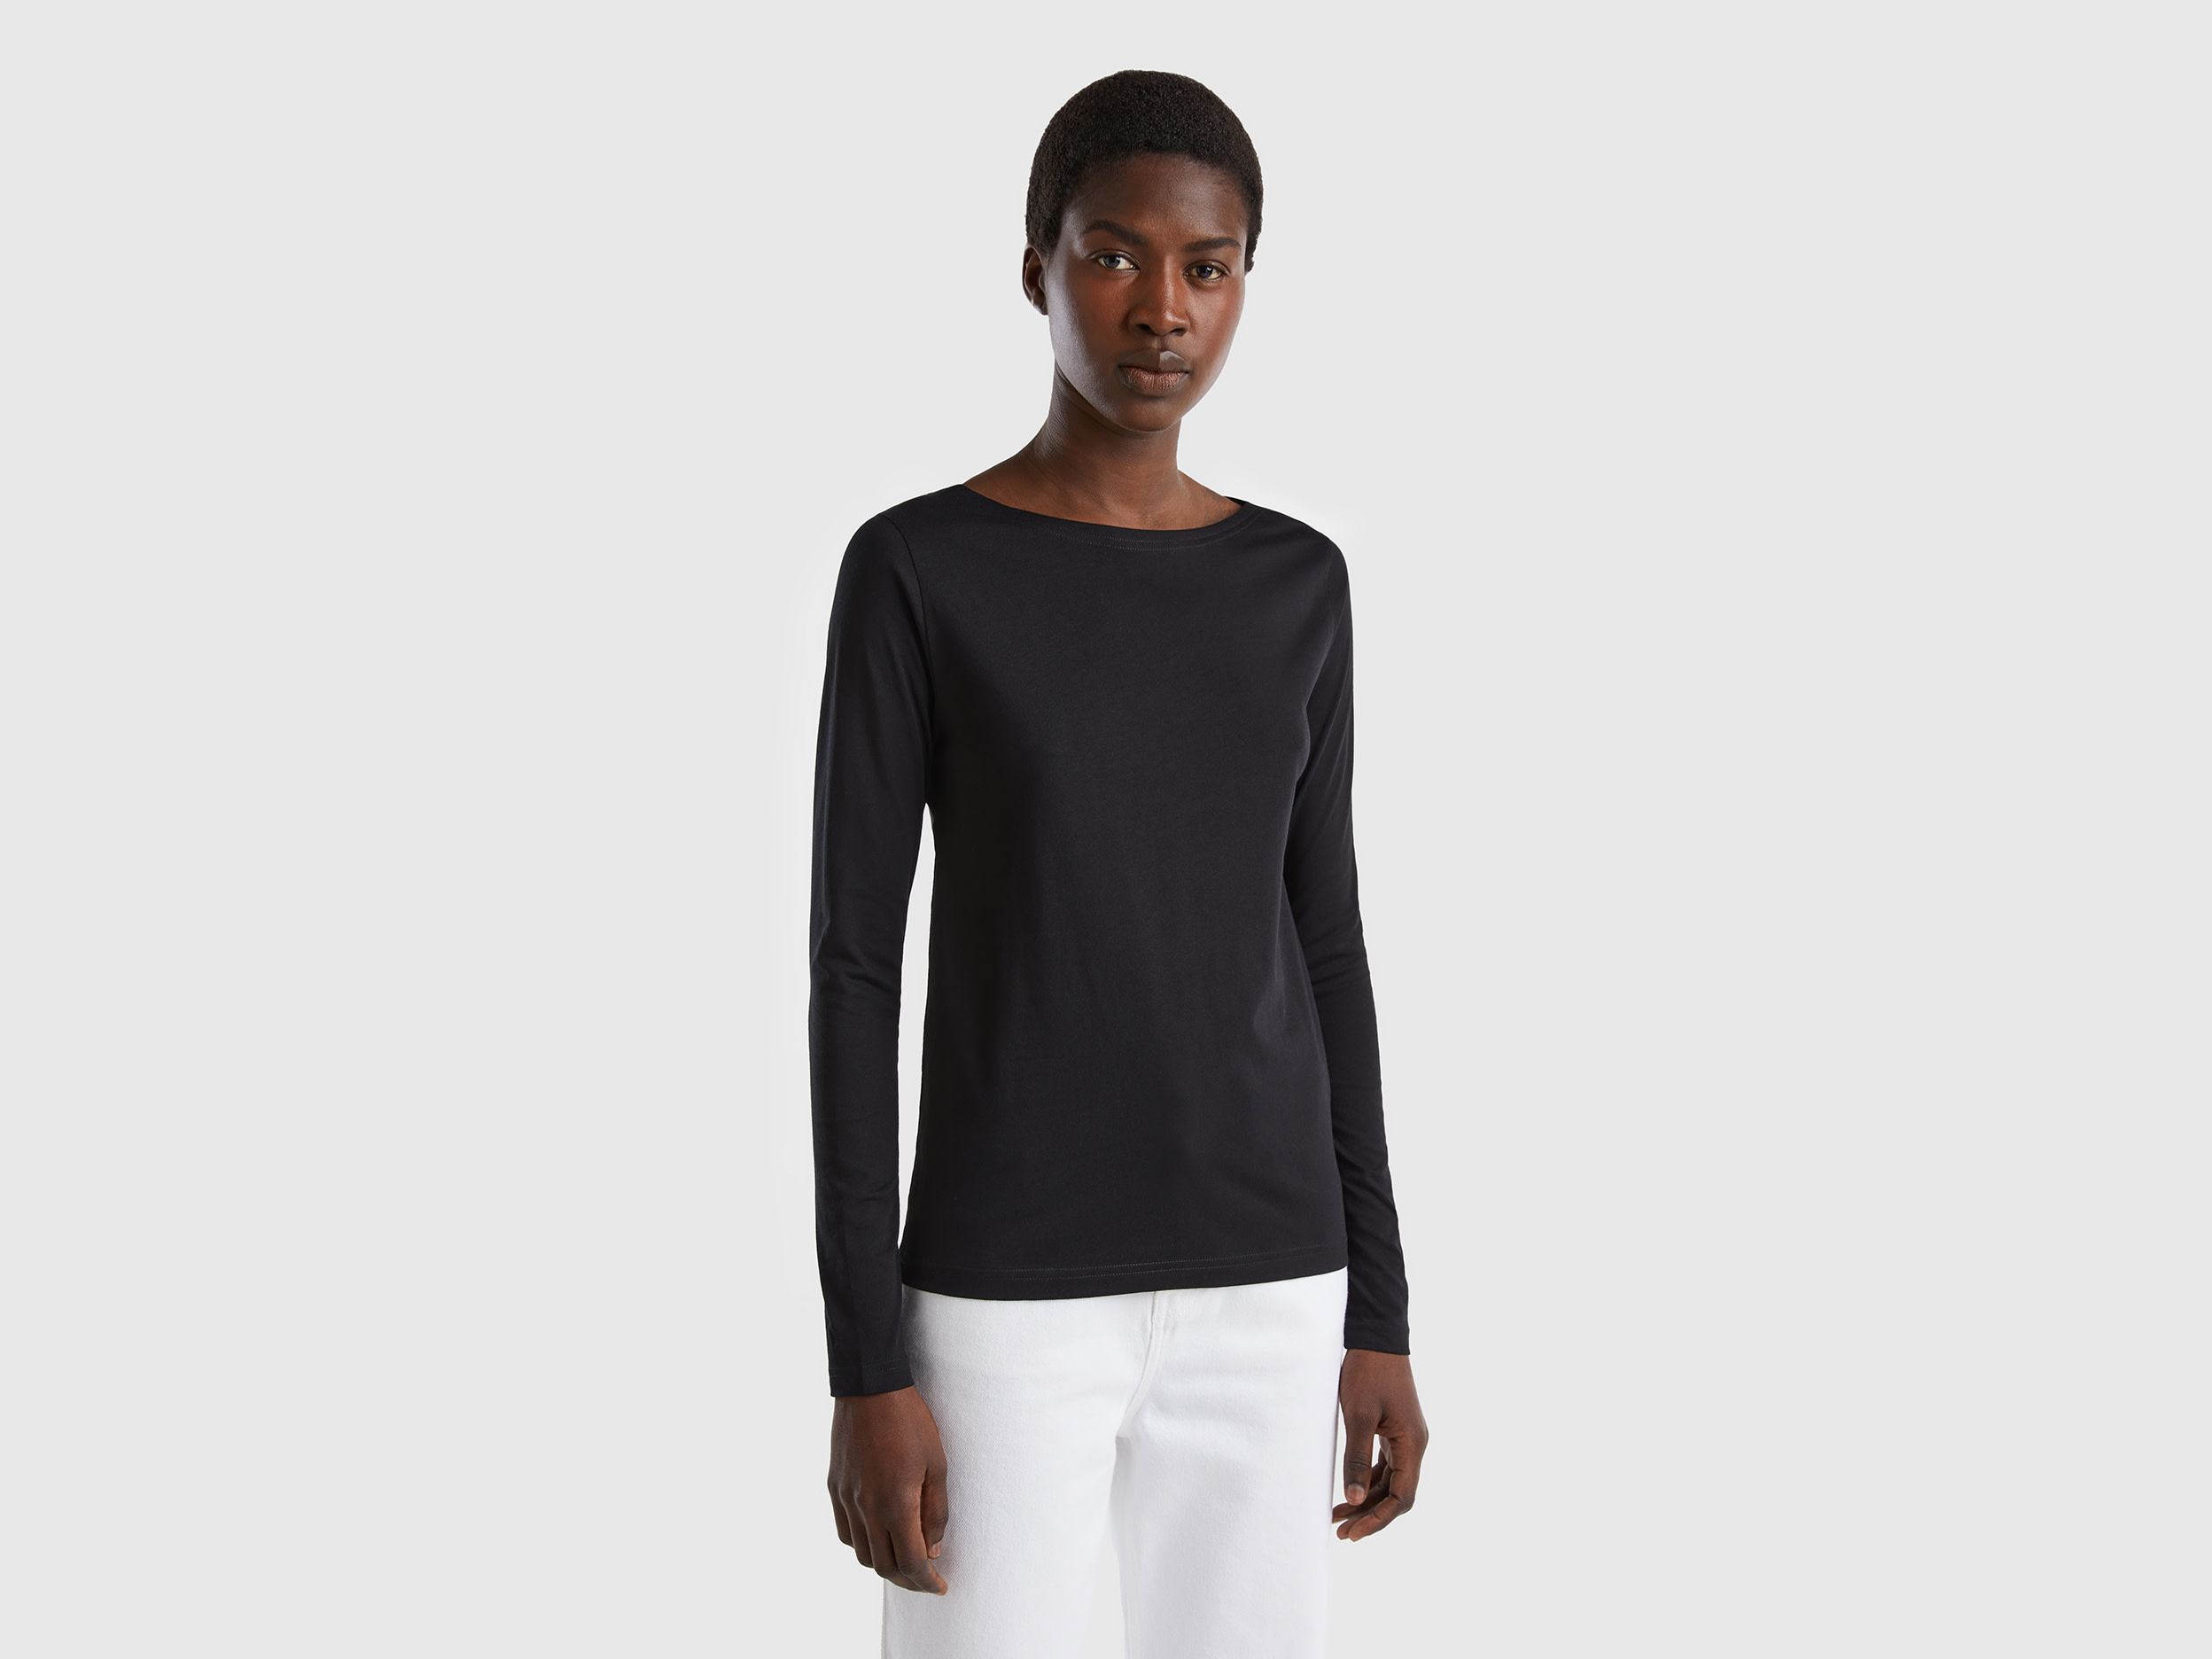 Benetton, T-shirt With Boat Neck In 100% Cotton, size XS, Black, Women